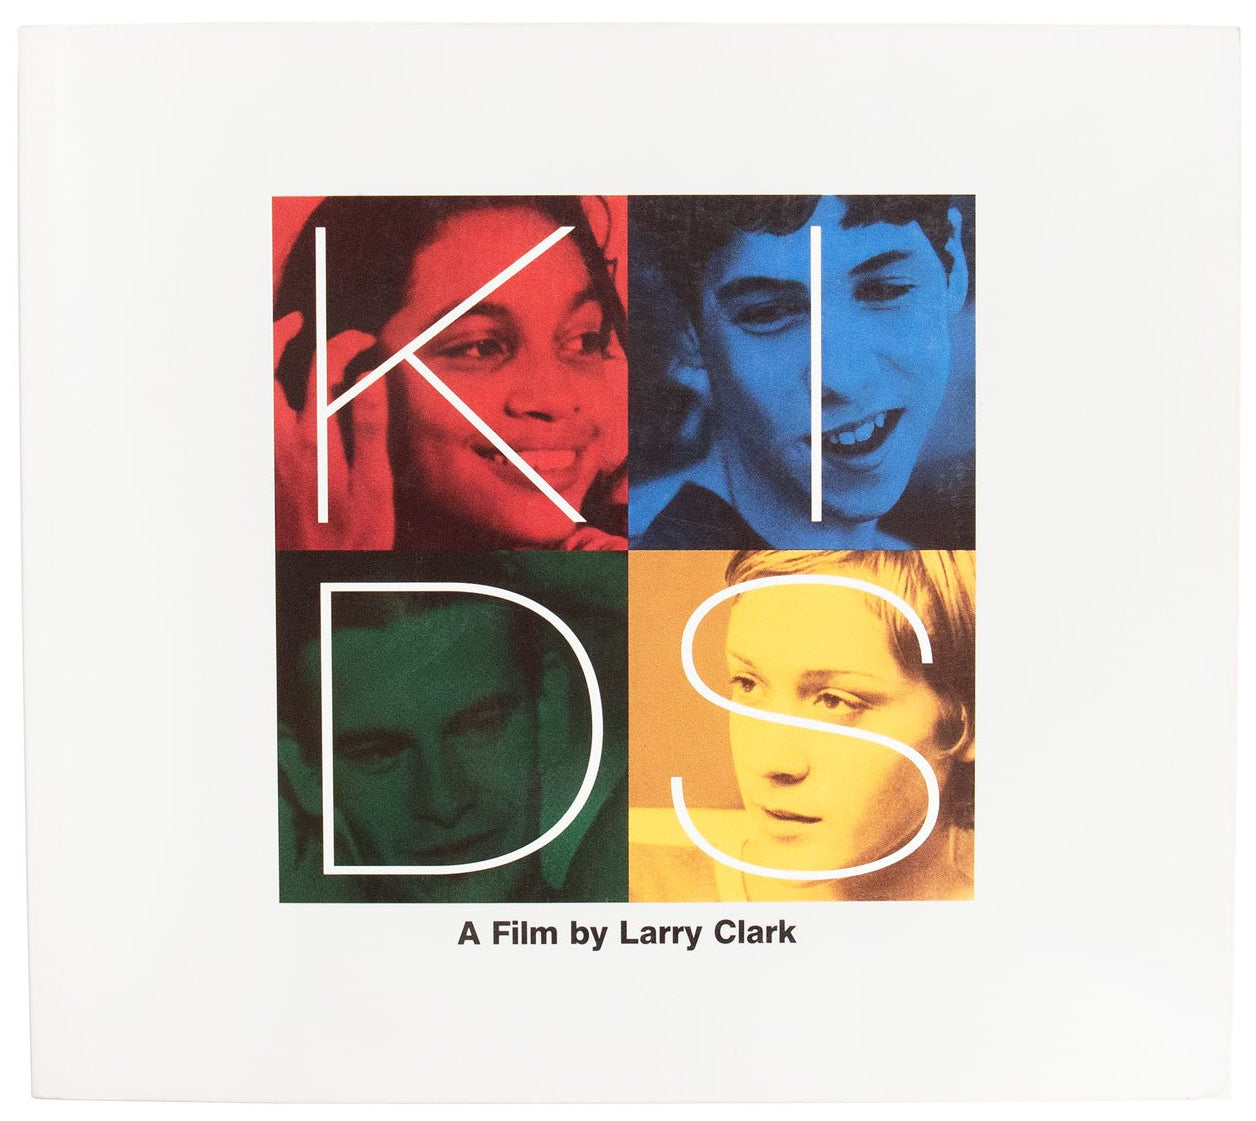 Image of the cover of Larry Clark's publication 